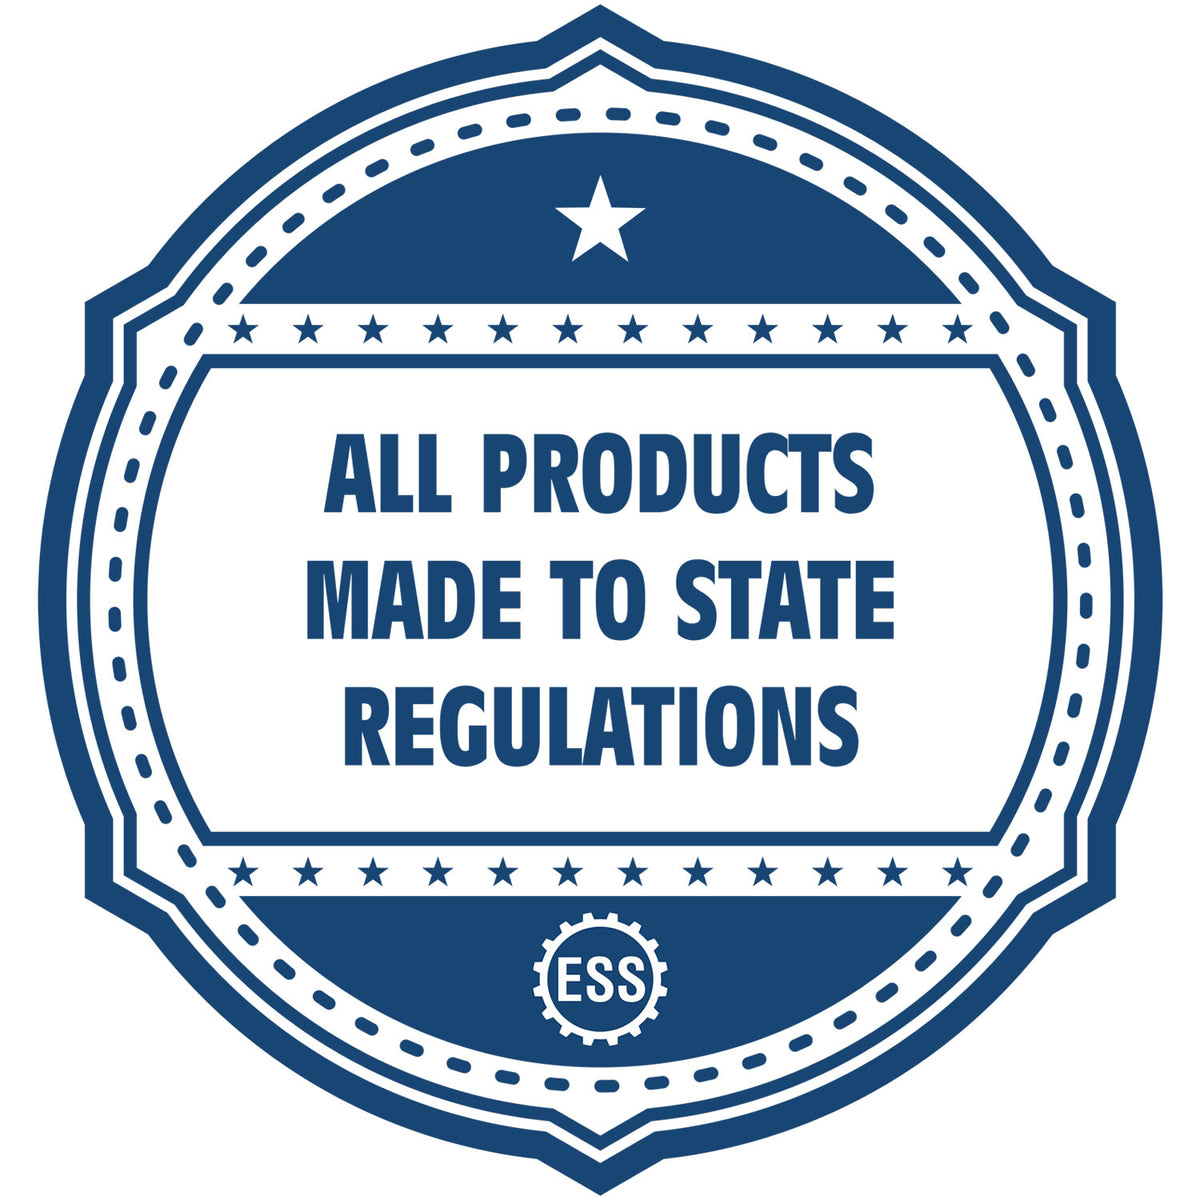 An icon or badge element for the Minnesota Desk Architect Embossing Seal showing that this product is made in compliance with state regulations.